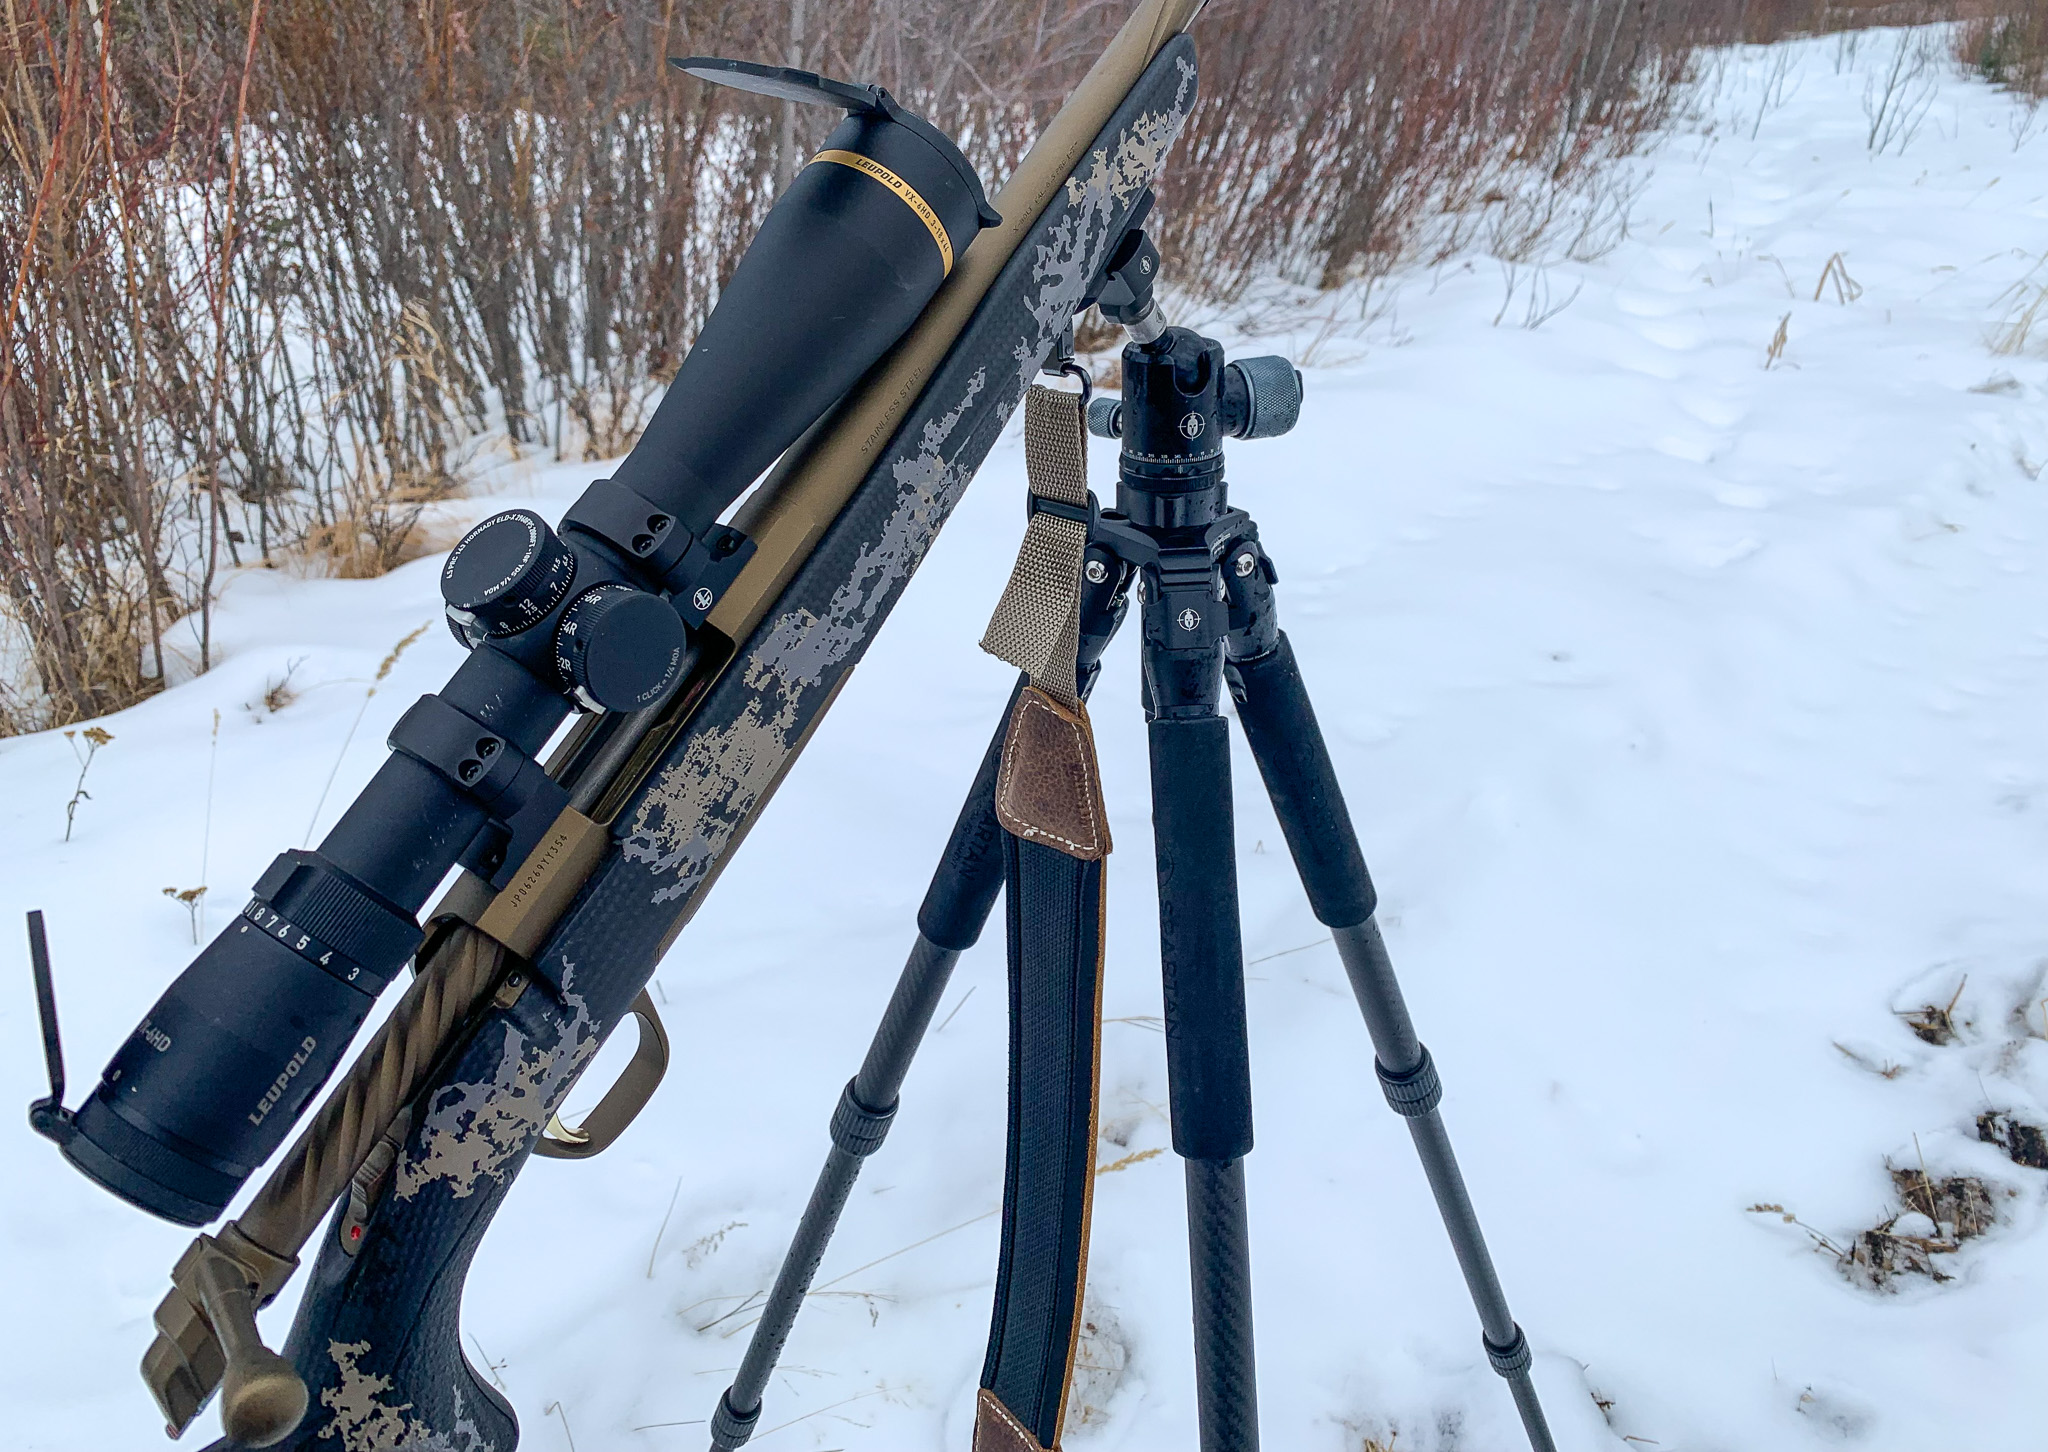 A Browning rifle with a Leupold scope sits on a tripod in the snow.